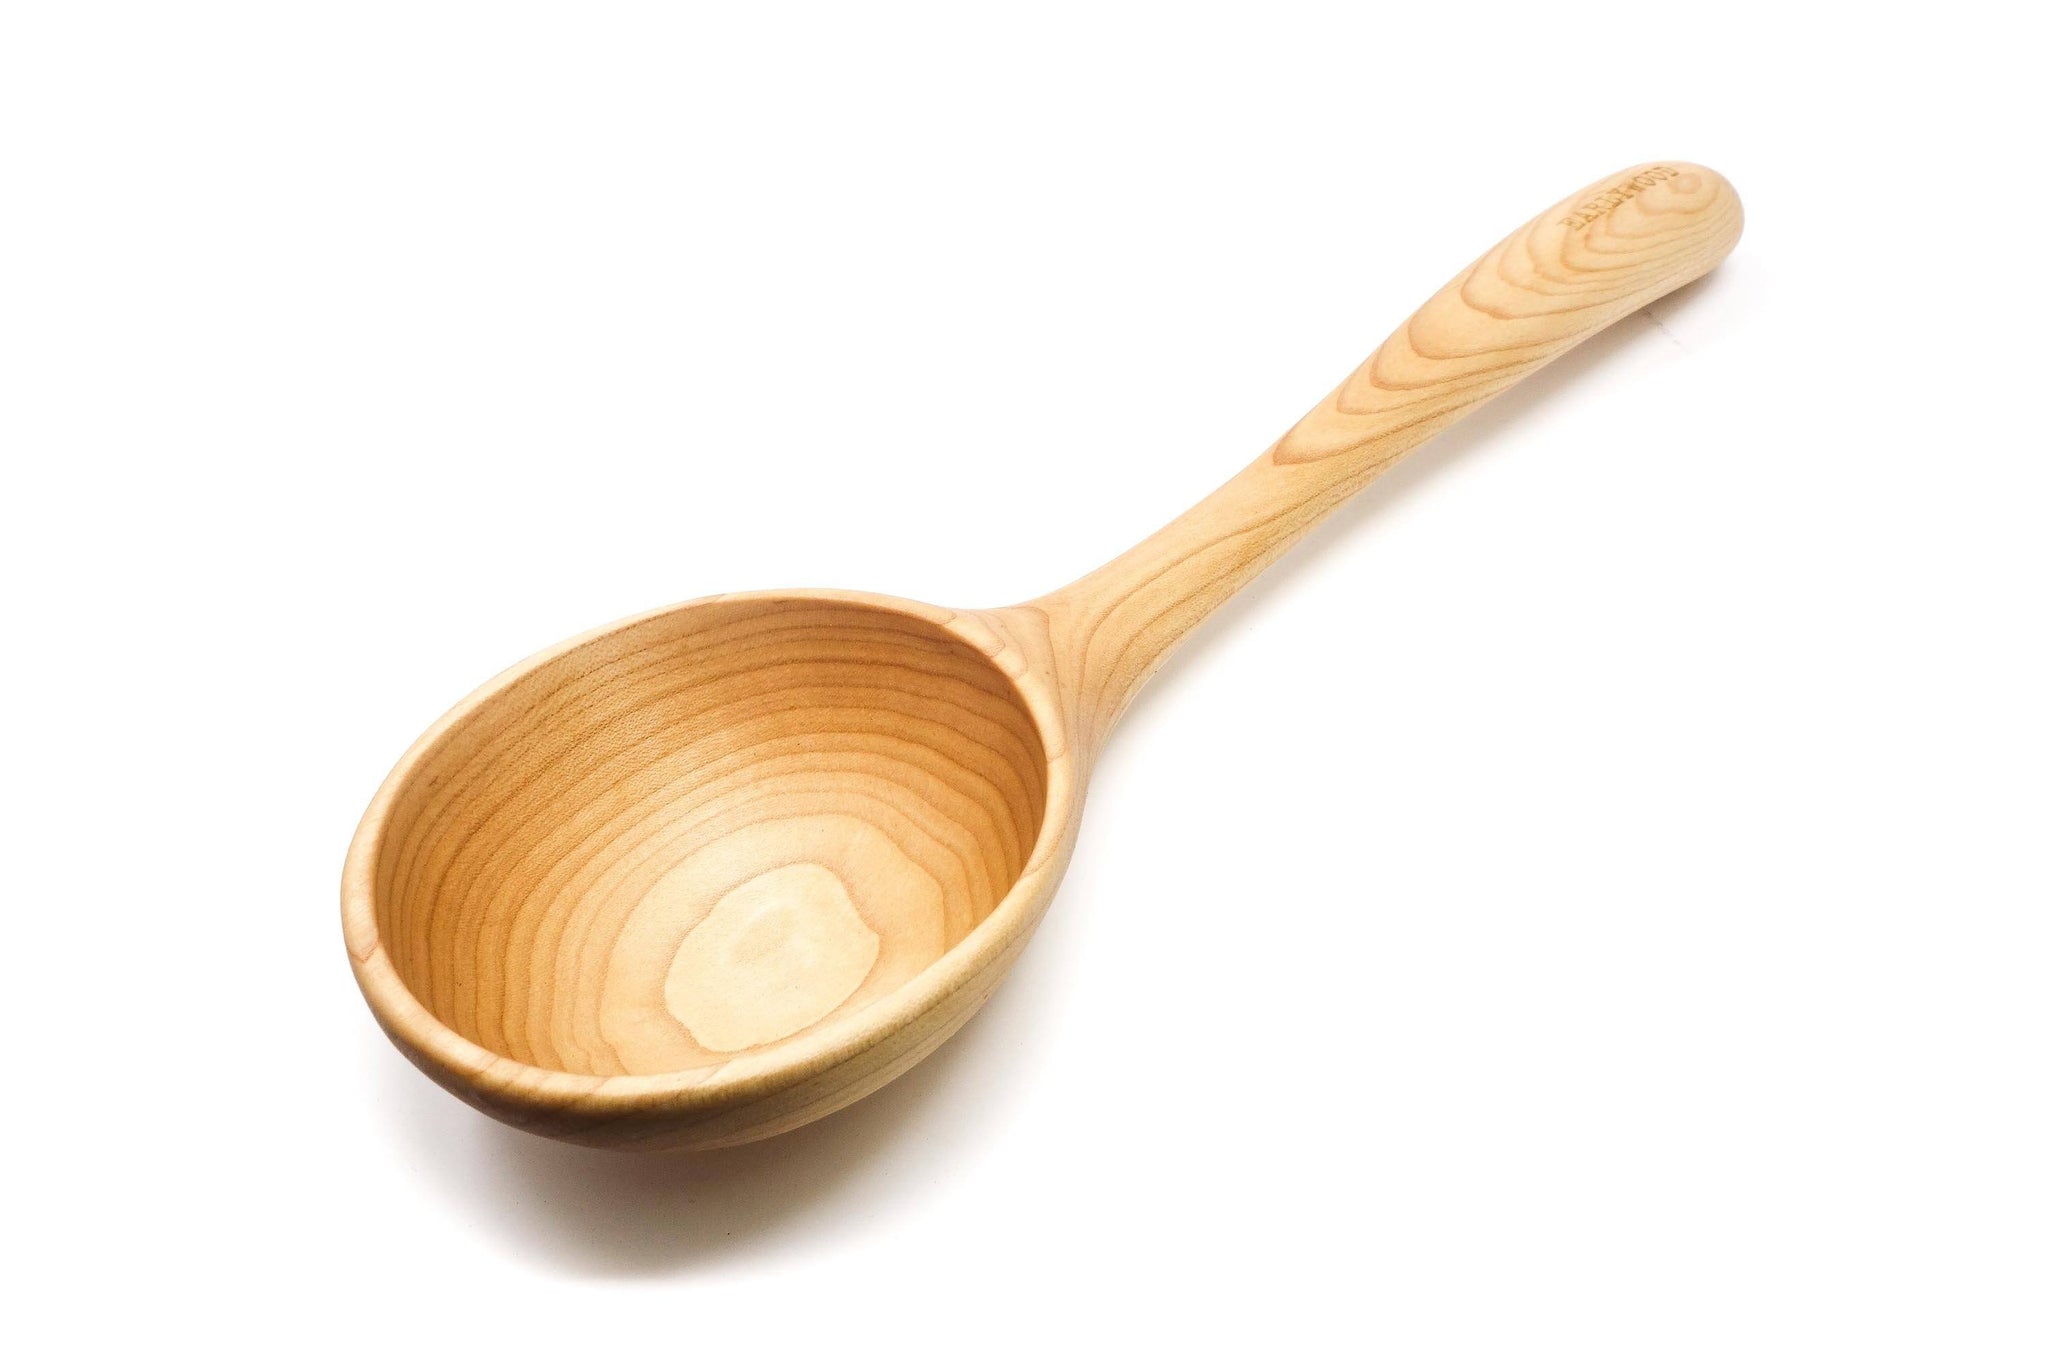 Wooden Cooking Spoon - Earlywood